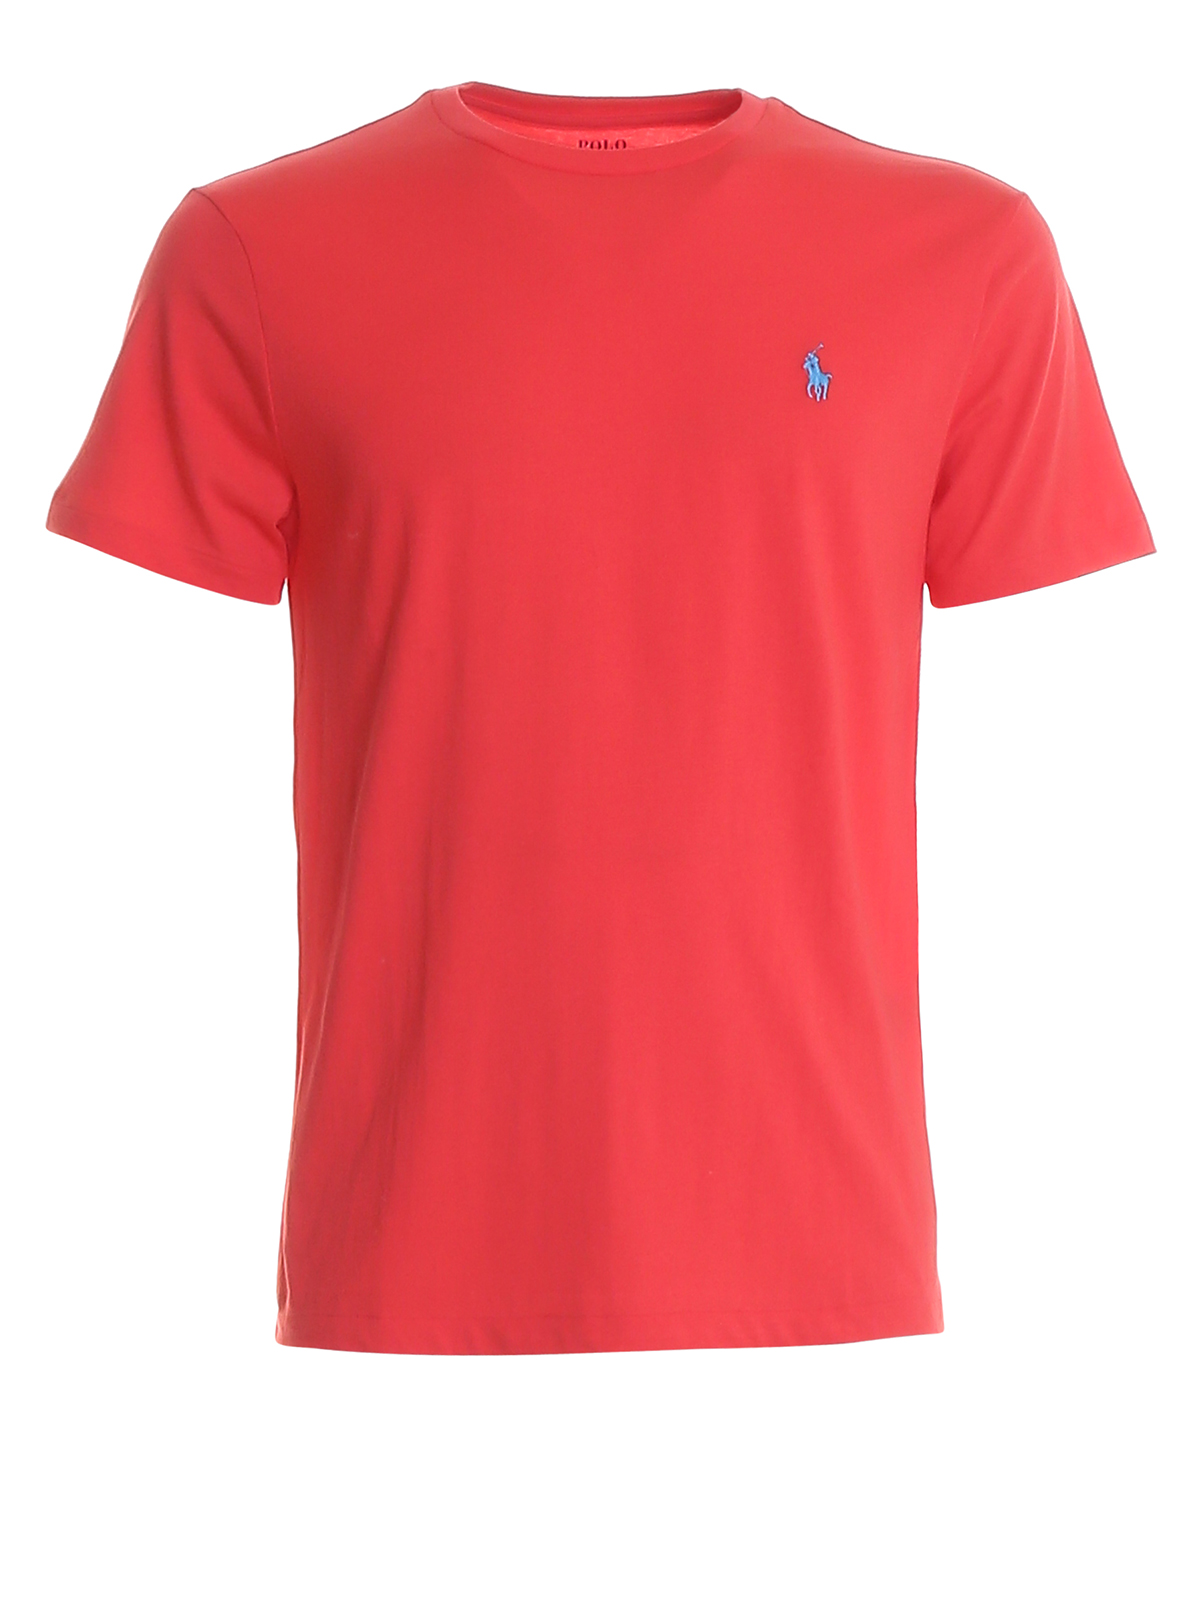 POLO RALPH LAUREN LOGO EMBROIDERY CORAL T-SHIRT